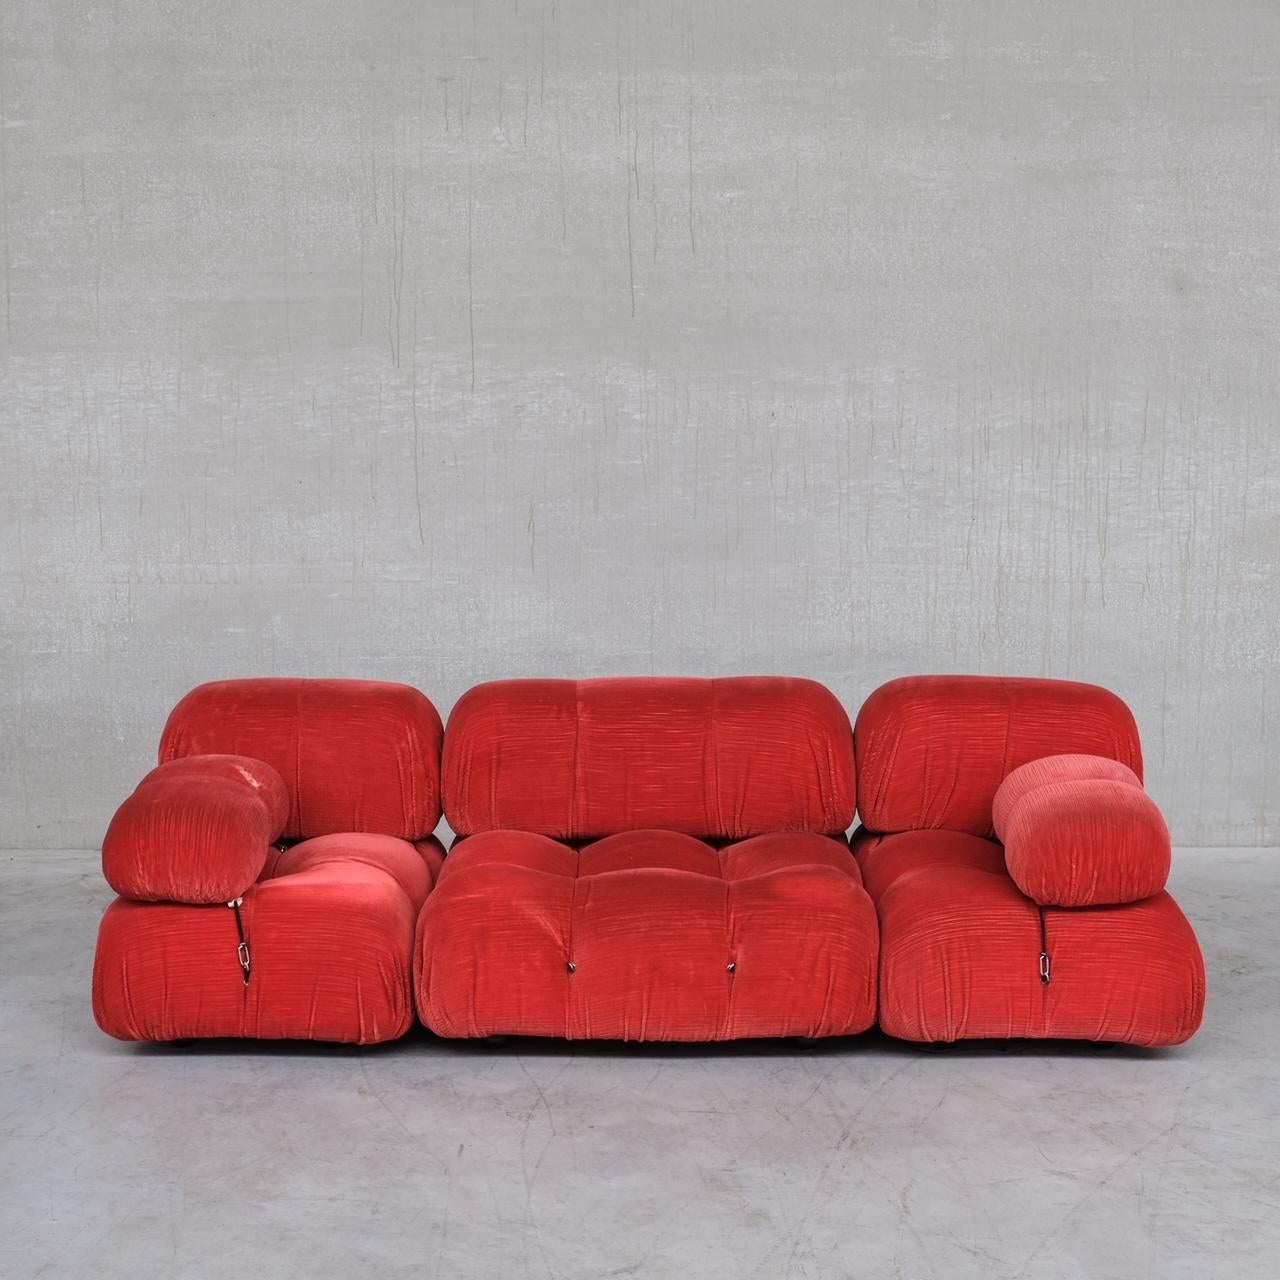 A three piece modular sofa by Mario Bellini, for B&B Italy. 

Italy, c1970s. 

The esteemed 'Camaleonda' sofa has achieved legendary status in the design world. 

The original red fabric has been retained but there is one or two tears (see